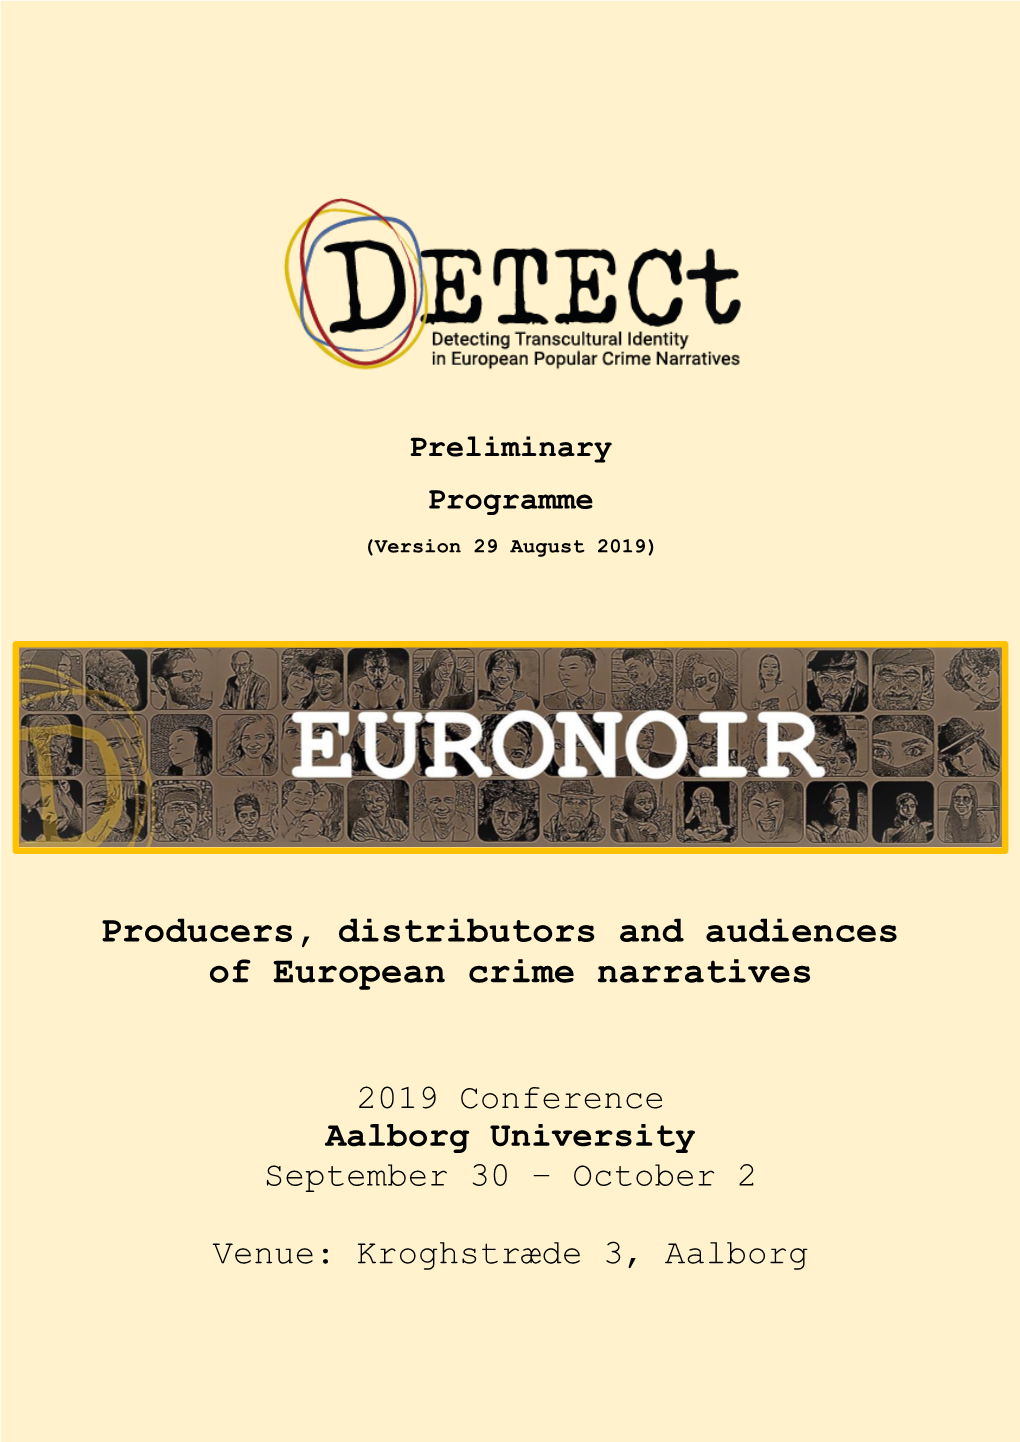 Producers, Distributors and Audiences of European Crime Narratives